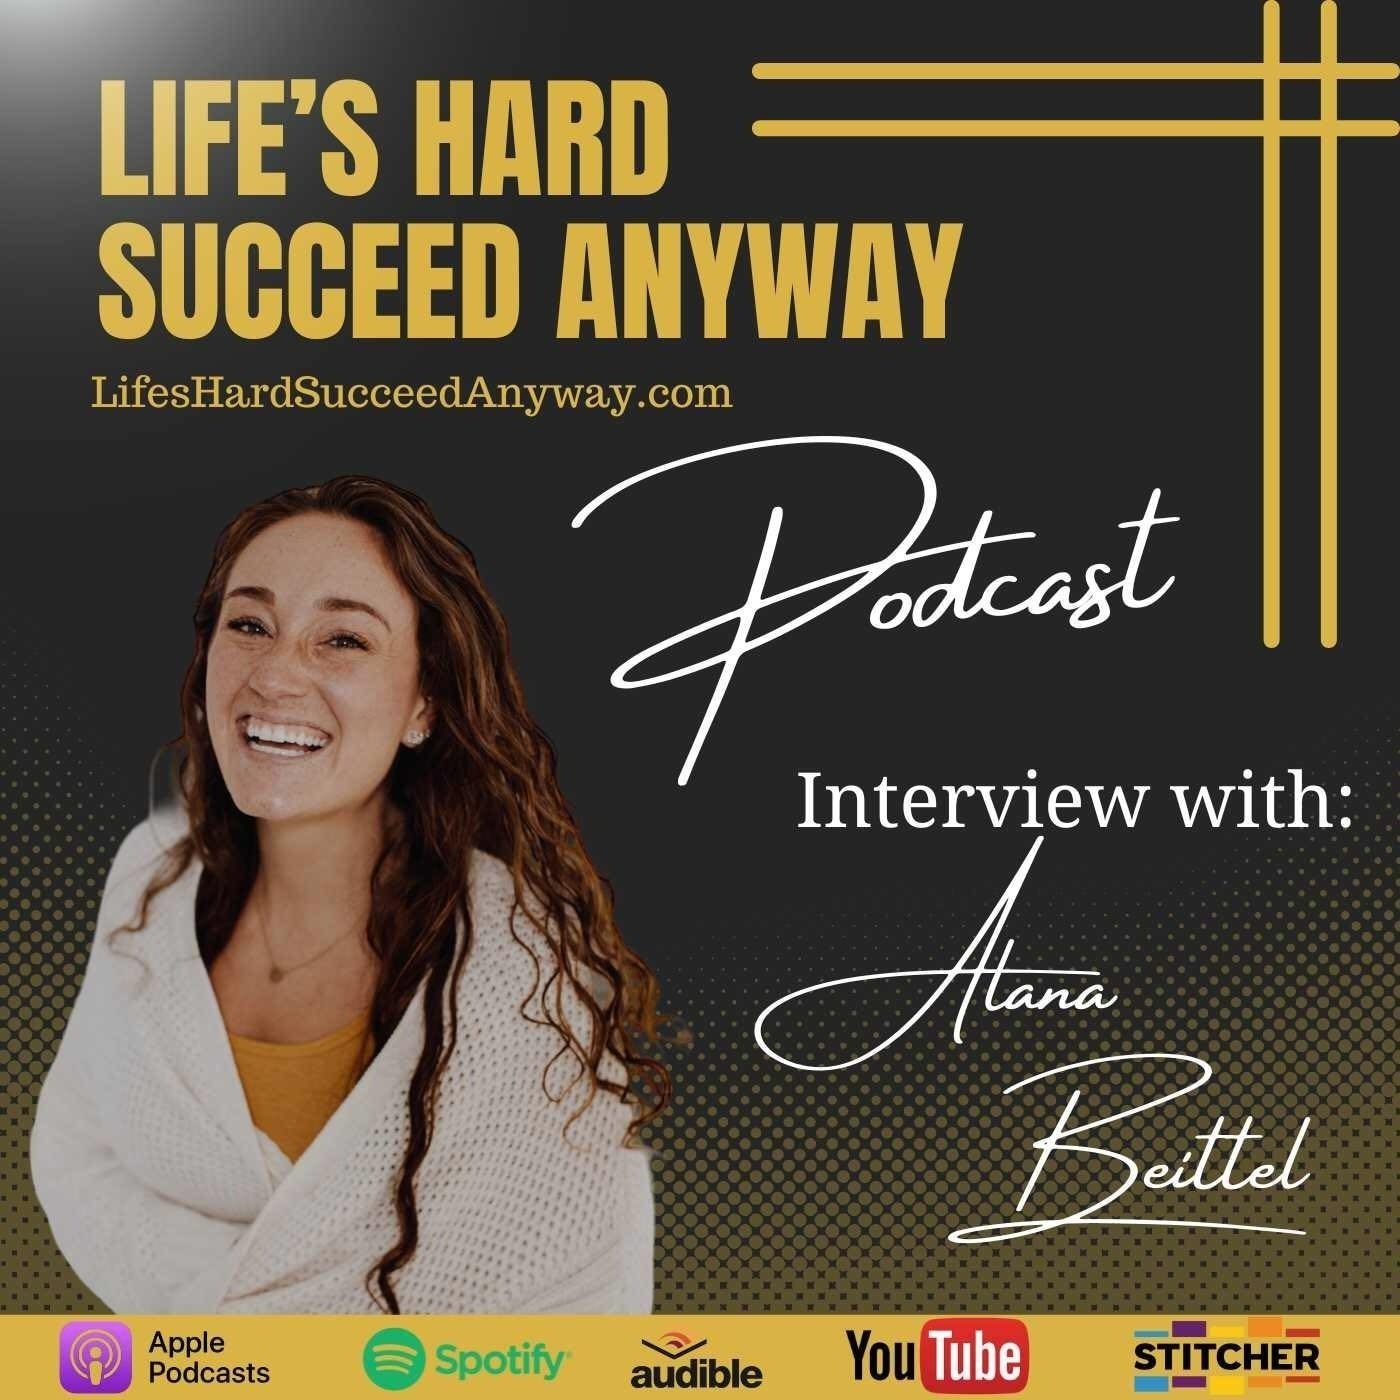 067. Alana Beittel: NICU Nurse Turned Life Coach Helps Others Live Their Best Life